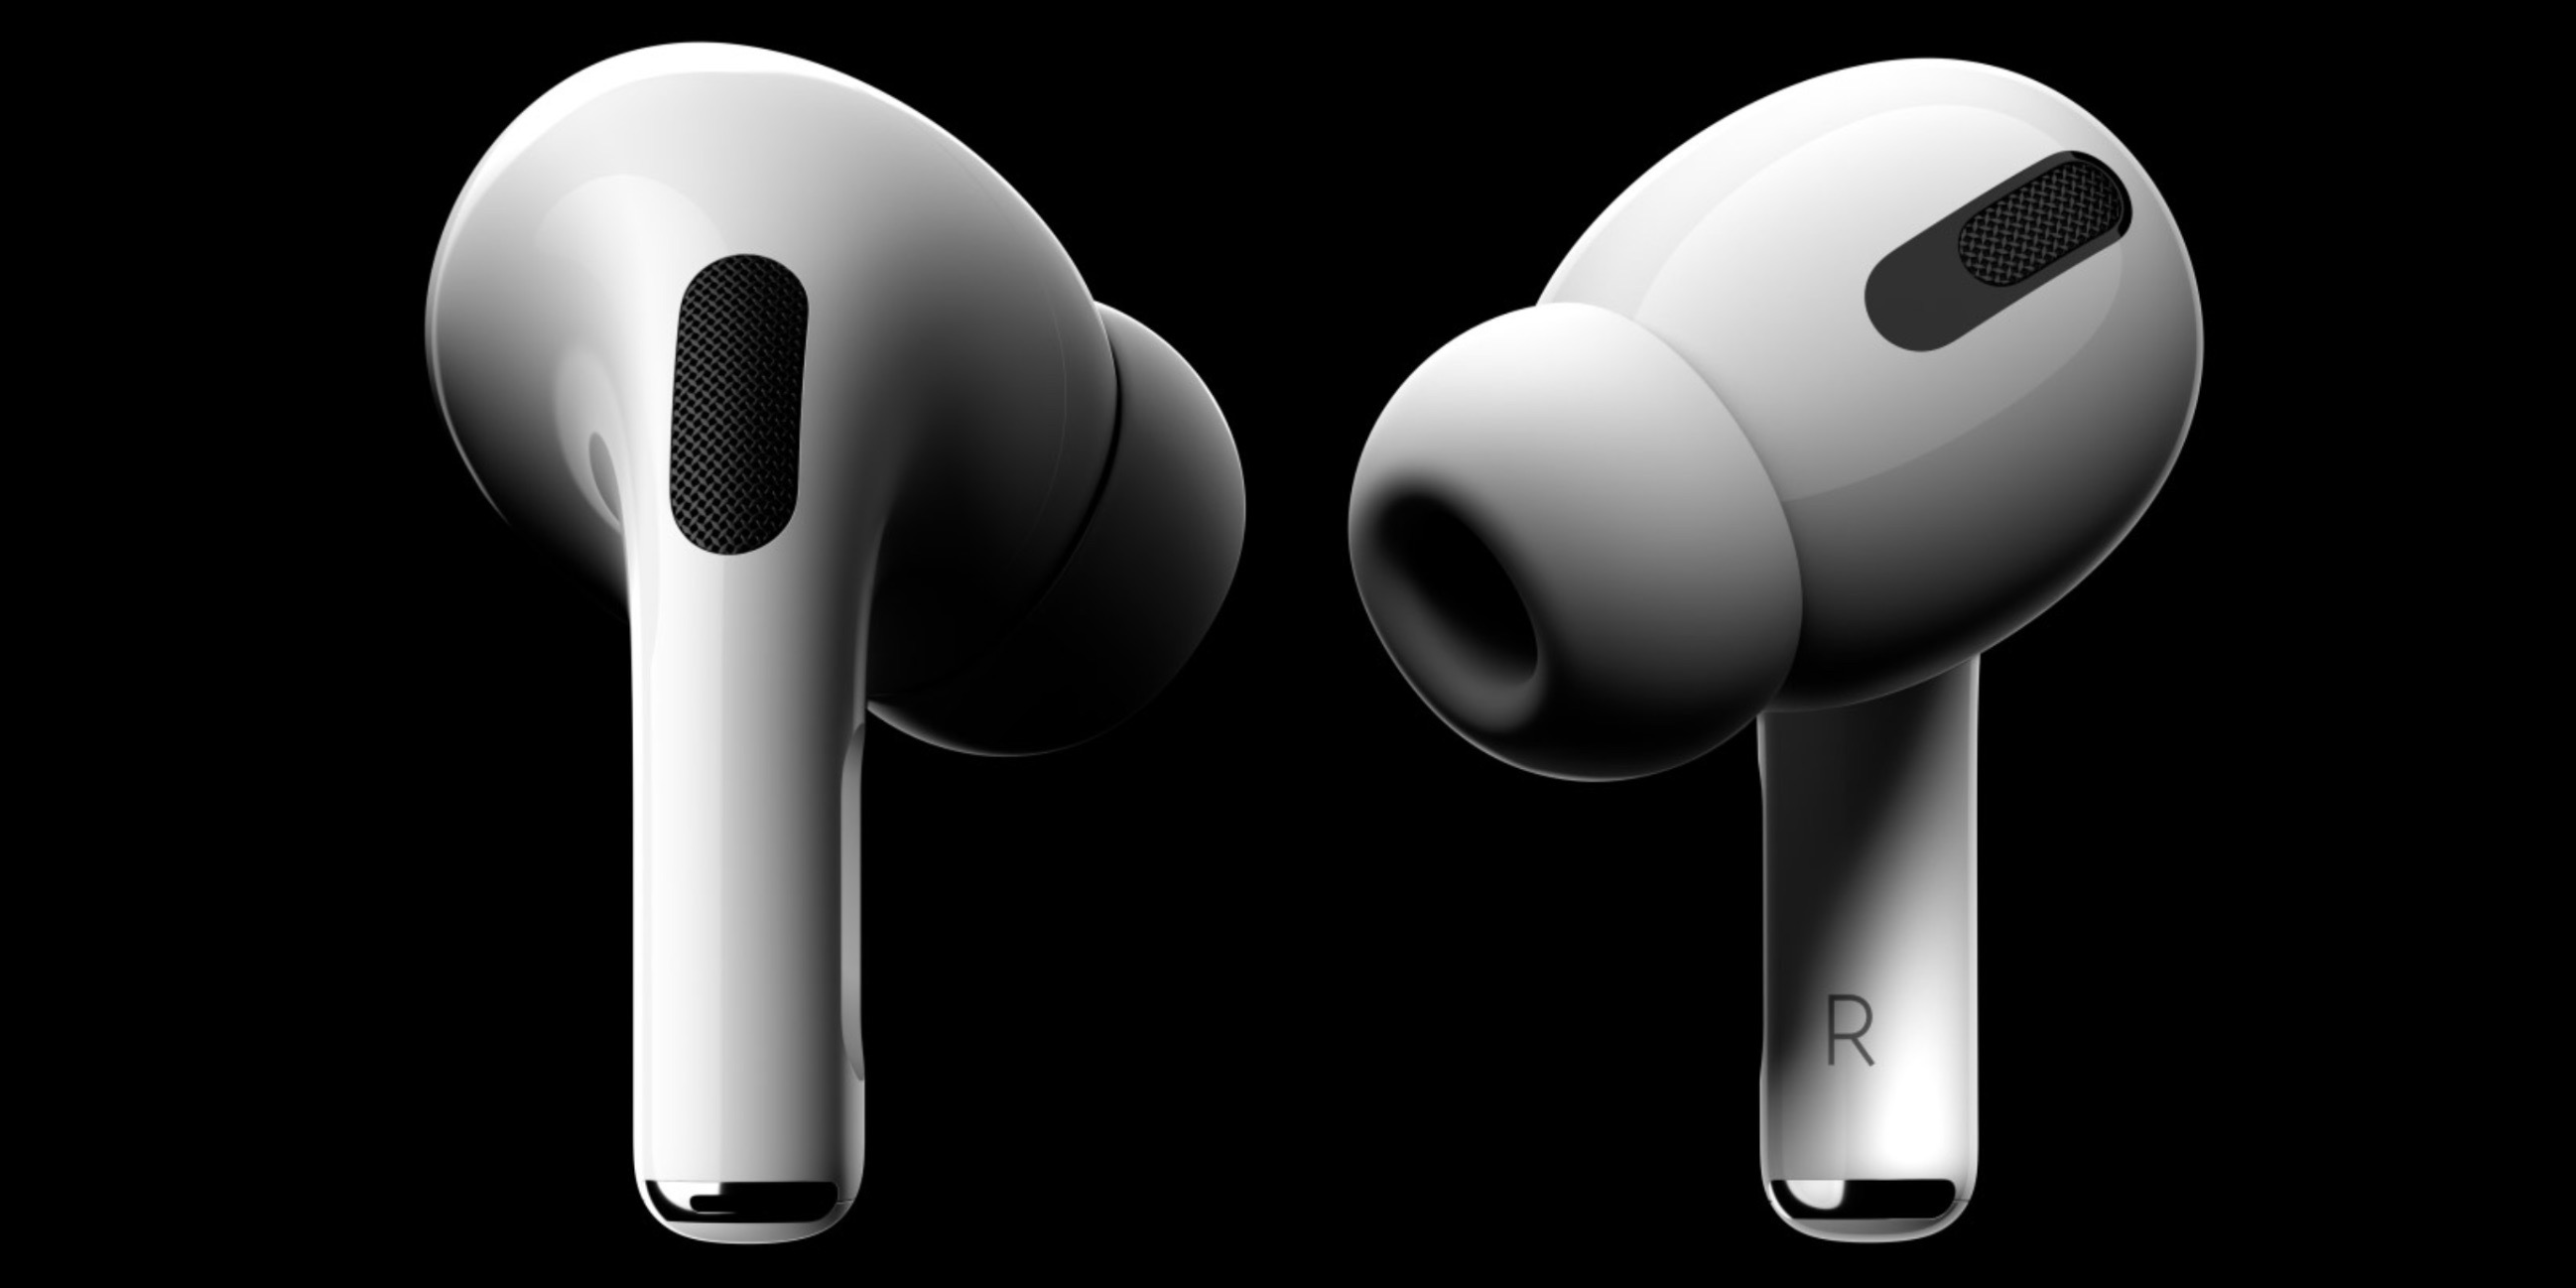 Price Of One Airpod Sale Online, UP TO 50% OFF | www.ldeventos.com